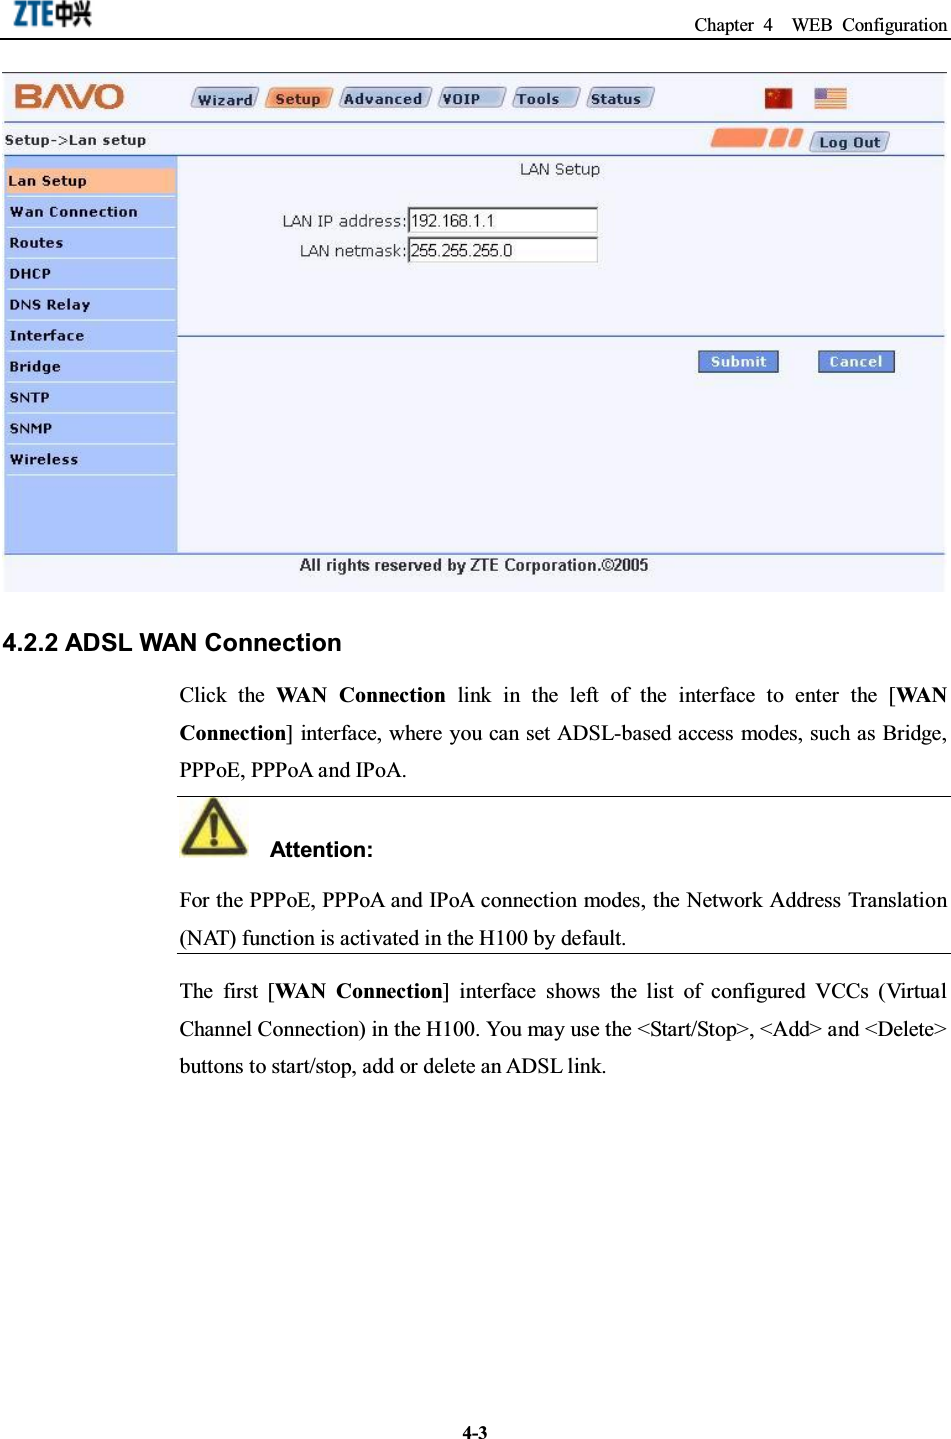 Chapter 4 WEB Configuration4-34.2.2 ADSL WAN ConnectionClick the WAN Connection link in the left of the interface to enter the [WA NConnection] interface, where you can set ADSL-based access modes, such as Bridge,PPPoE, PPPoA and IPoA.Attention:For the PPPoE, PPPoA and IPoA connection modes, the Network Address Translation(NAT) function is activated in the H100 by default.The first [WAN Connection] interface shows the list of configured VCCs (VirtualChannel Connection) in the H100. You may use the &lt;Start/Stop&gt;, &lt;Add&gt; and &lt;Delete&gt;buttons to start/stop, add or delete an ADSL link.